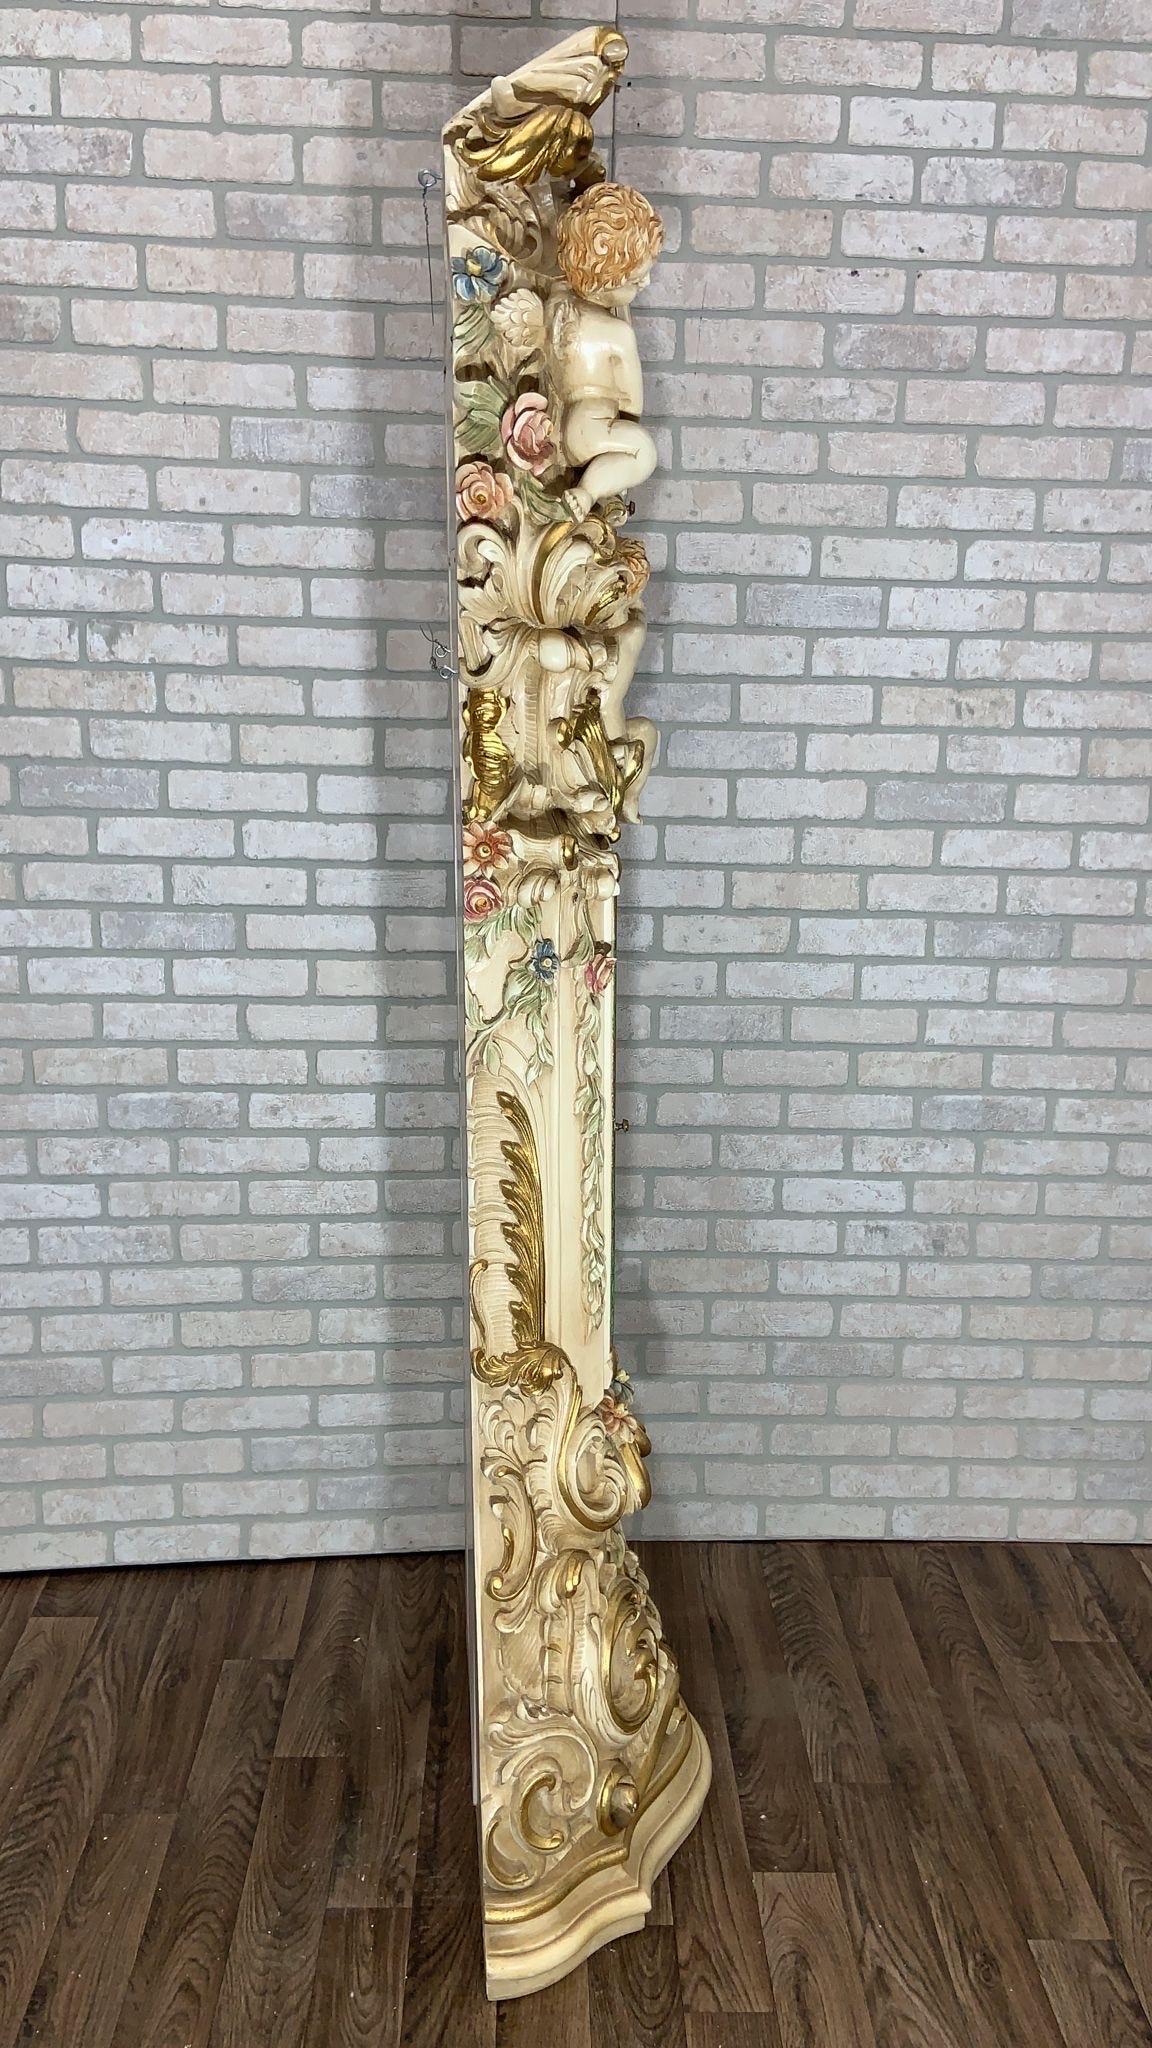 Vintage Italian Rococo Hand Carved and Painted Cherub/Angel Grandfathers Clock 

Featuring an Italian Rococo style hand carved and painted grandfather Clock. The clock has 3 cherubs at the top holding the clock's face. This floor clock is a piece of